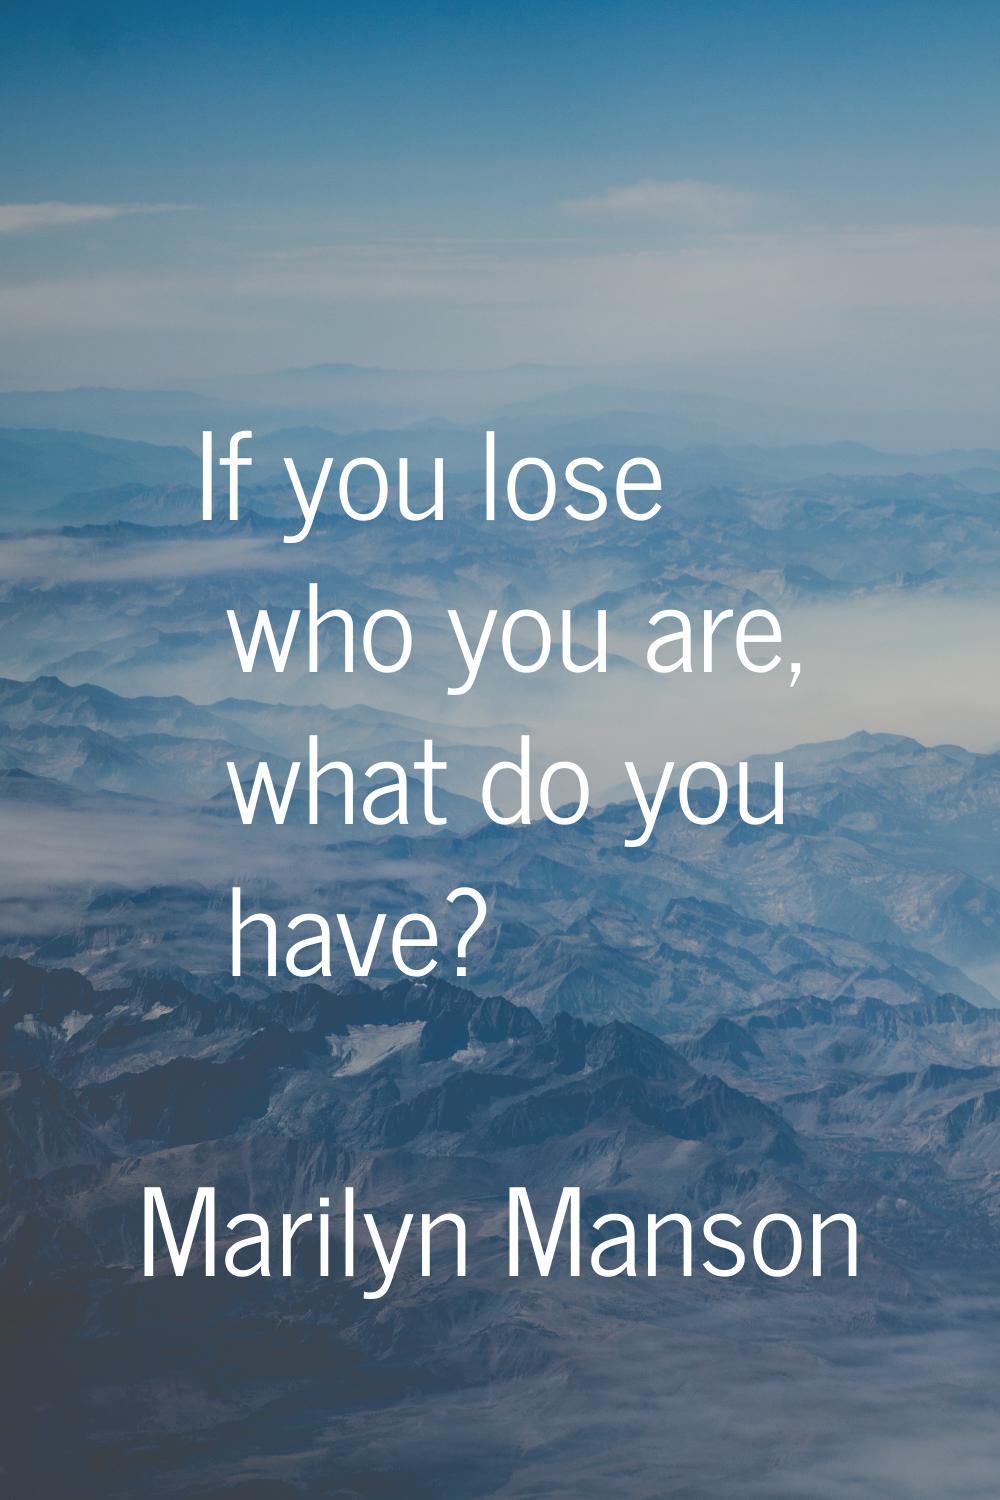 If you lose who you are, what do you have?